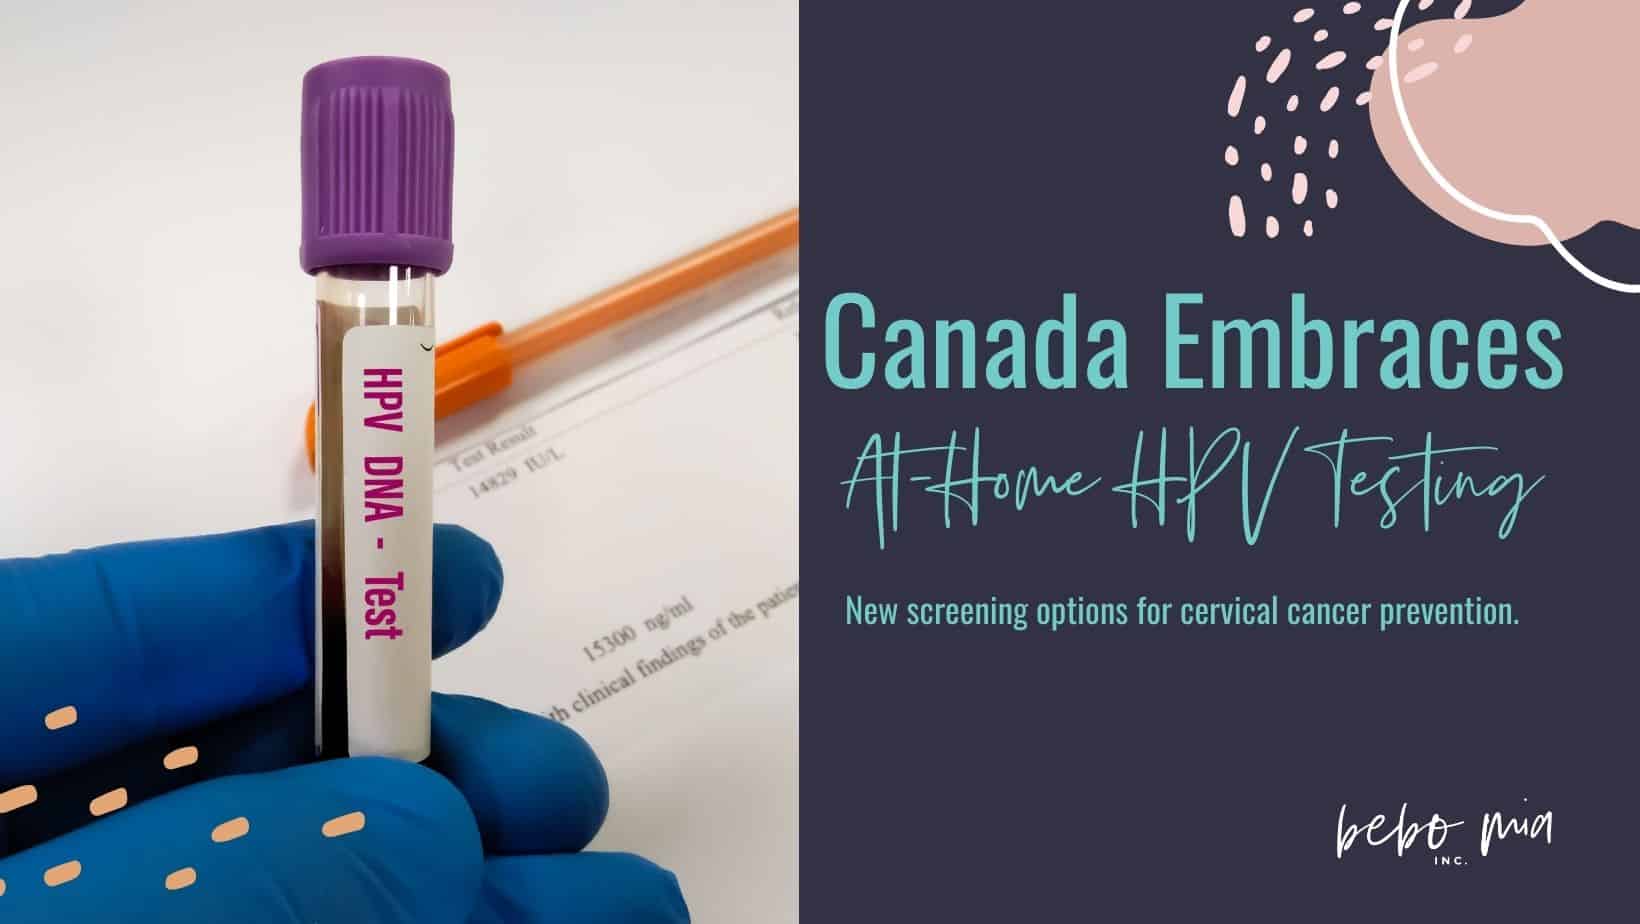 HPV Testing at home